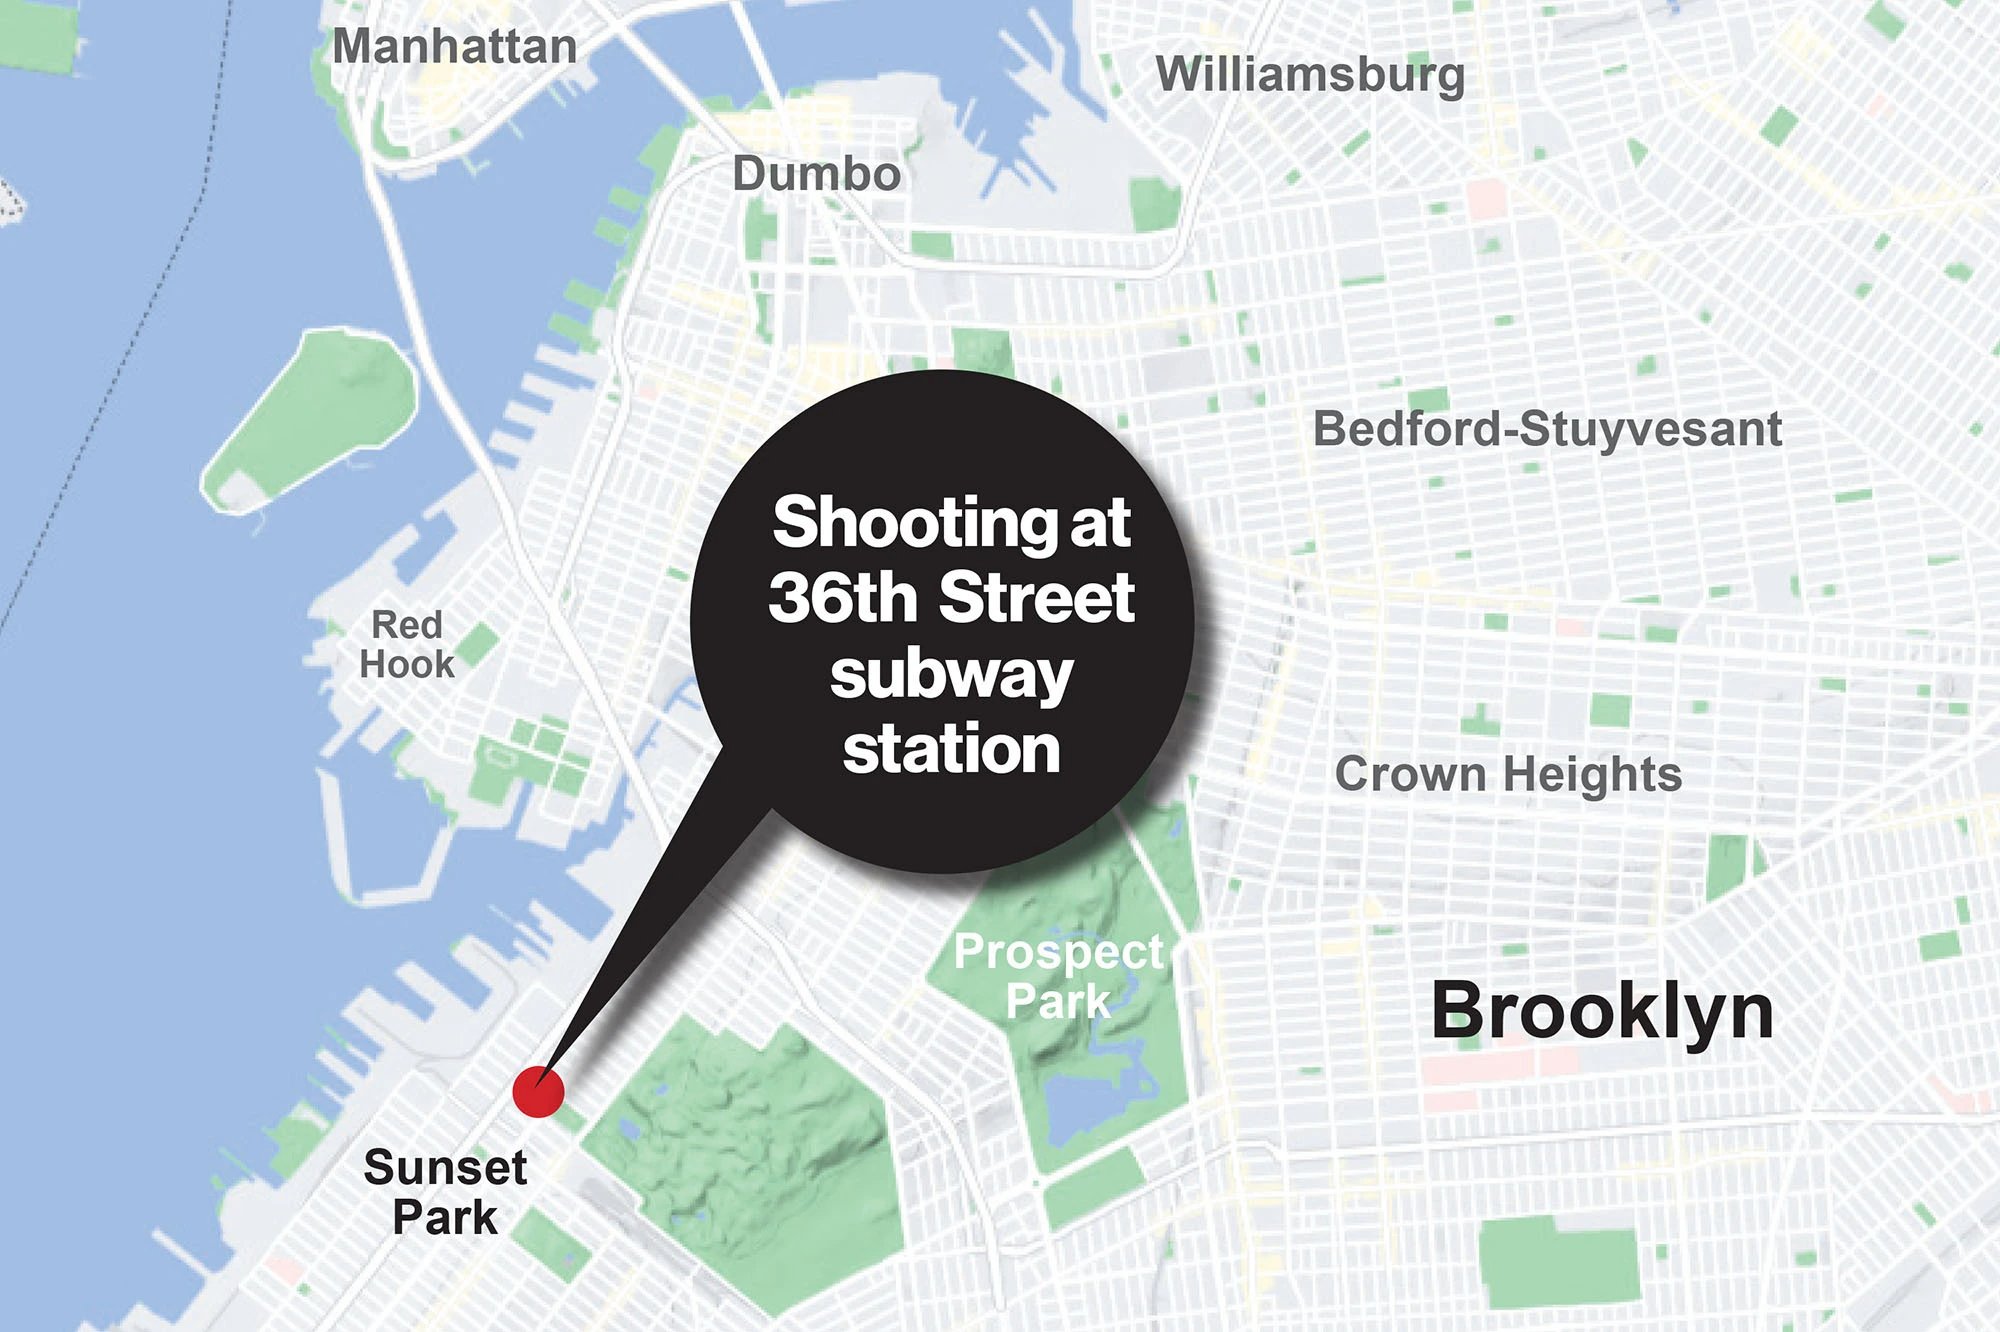 Brooklyn subway shooting live updates: Sunset Park schools in lockdown after subway shooting